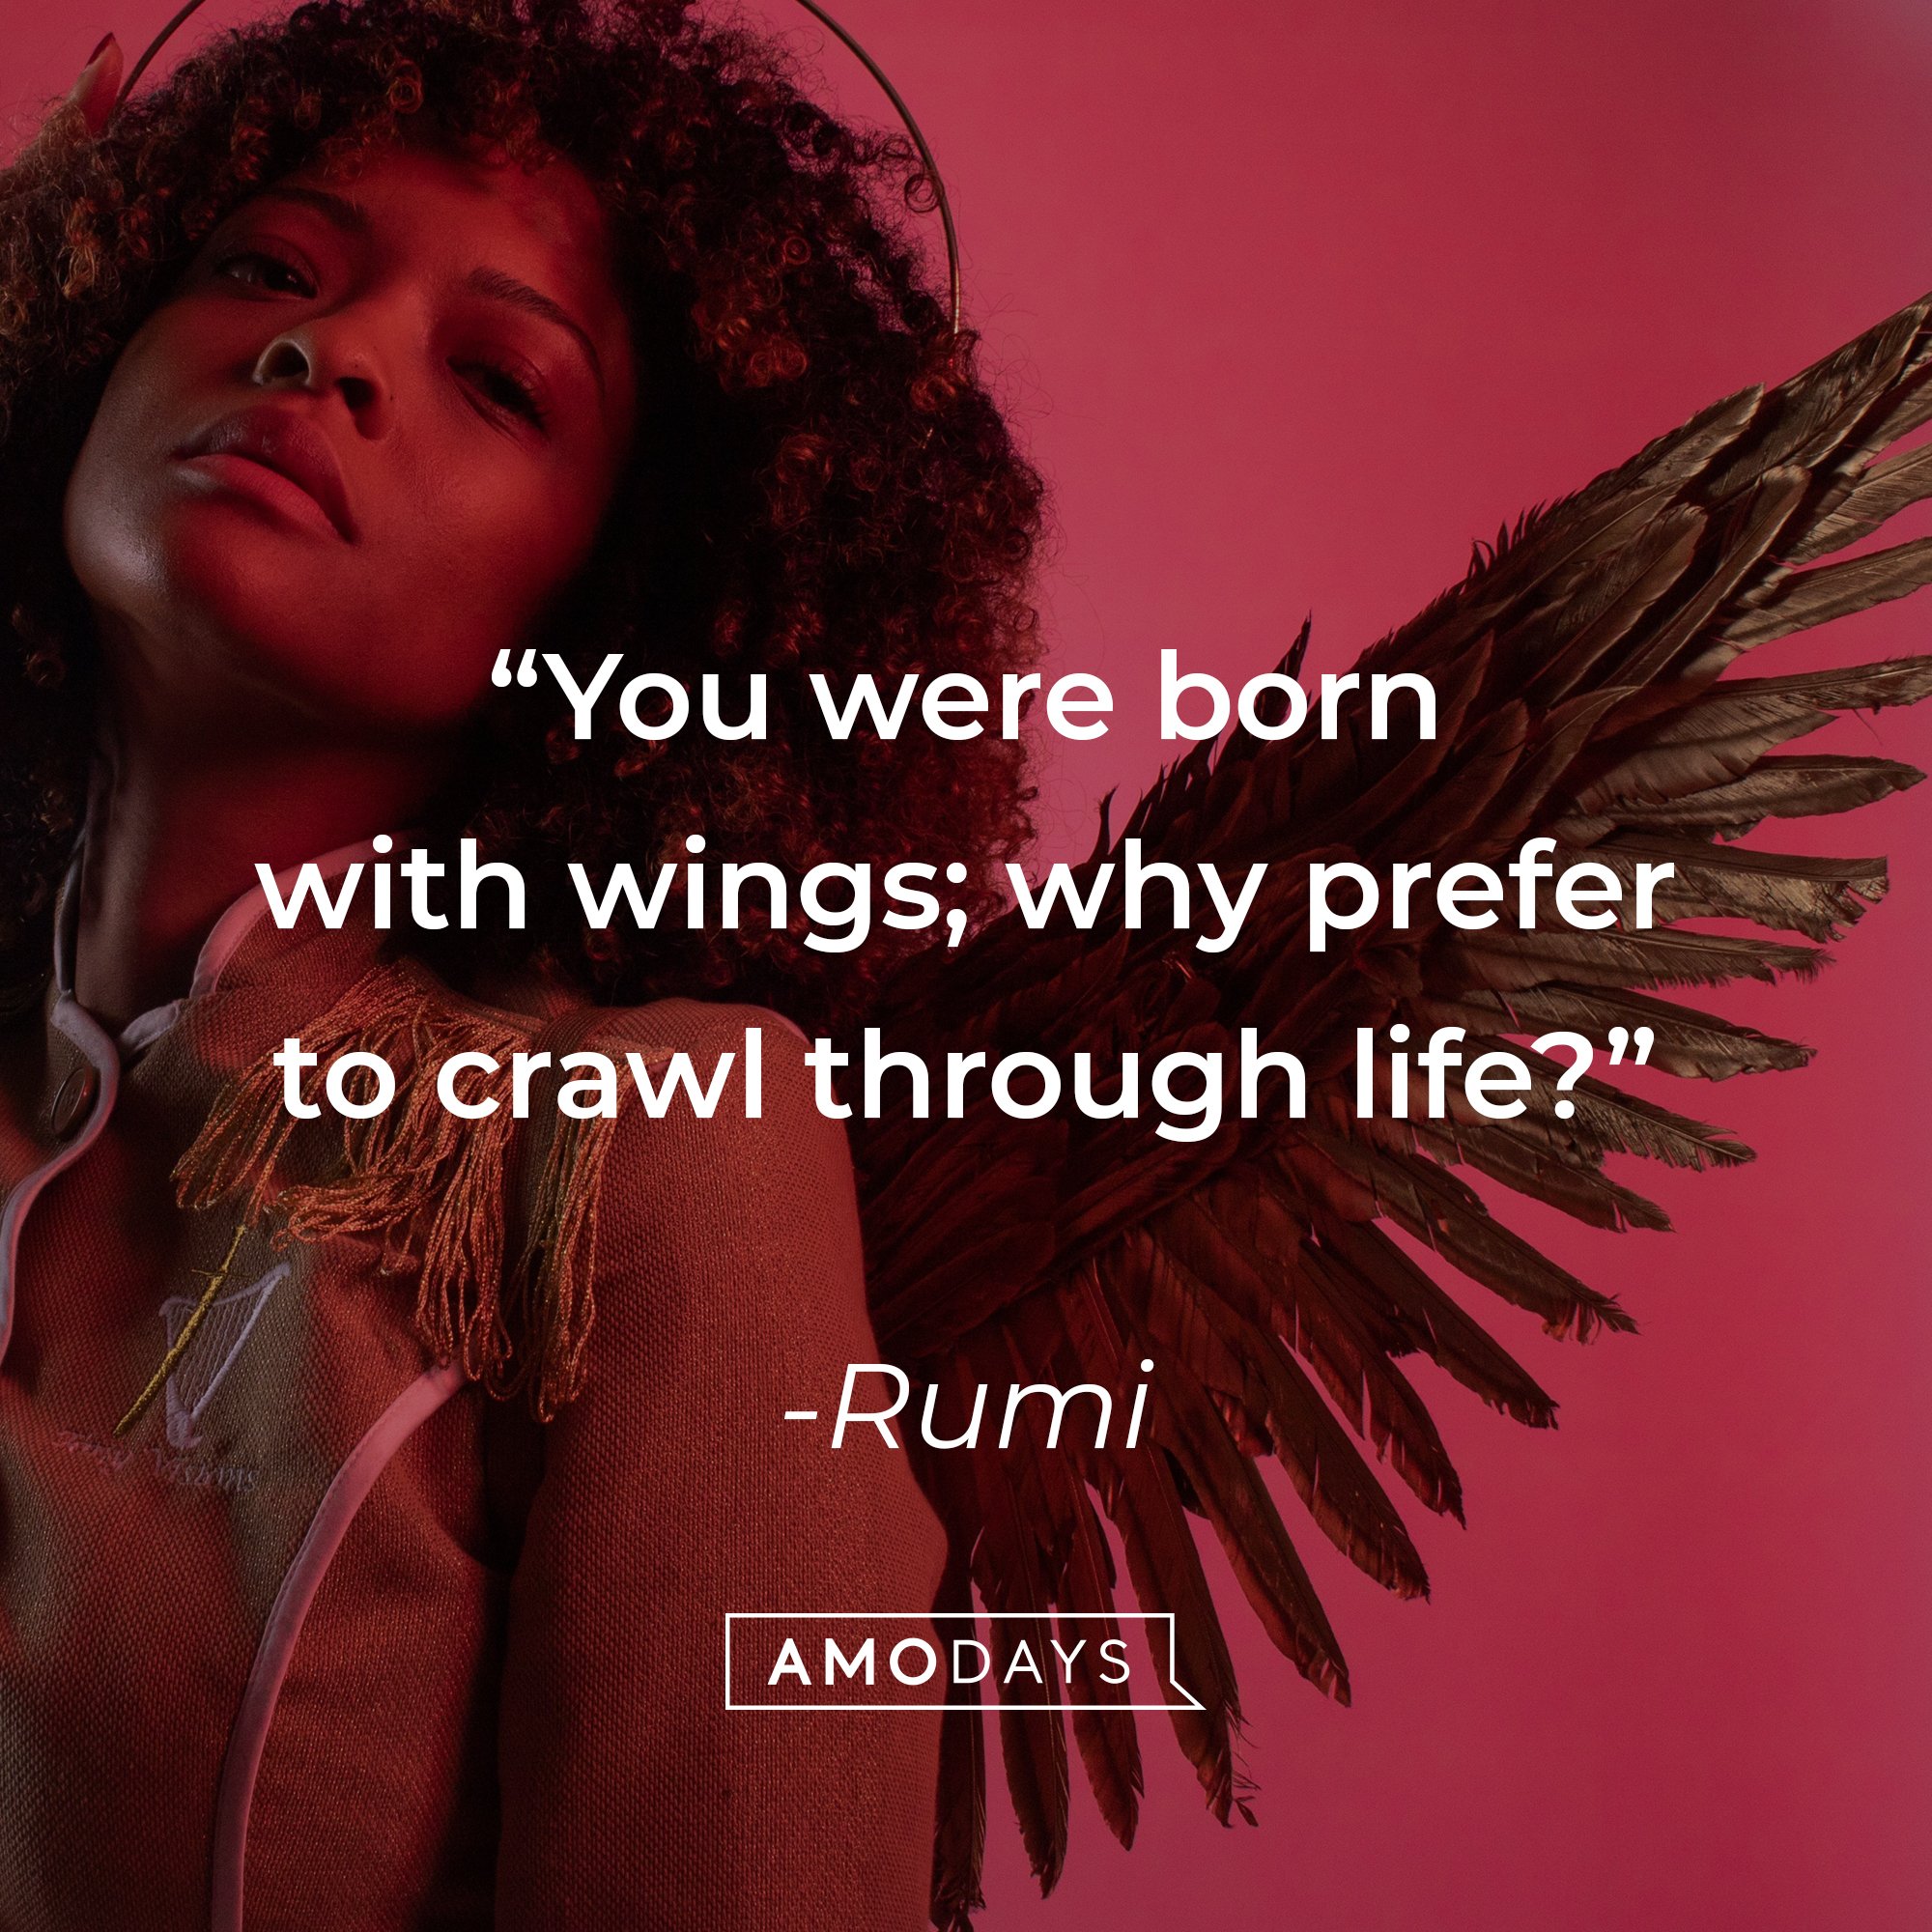 Rumi's quote: "You were born with wings; why prefer to crawl through life?" | Image: AmoDays